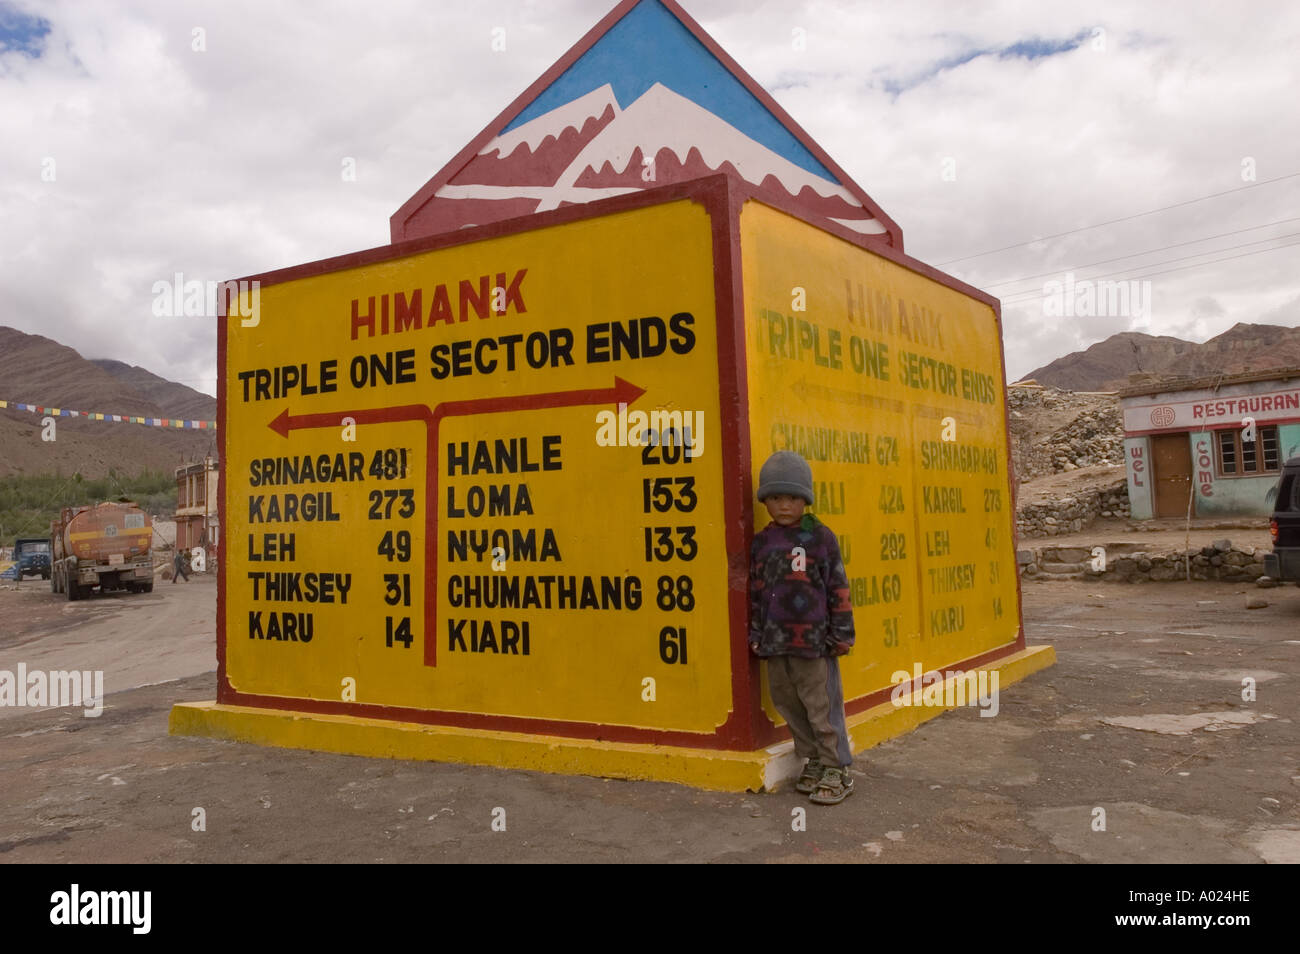 Small boy standing next to road sign in Ladakh India Stock Photo